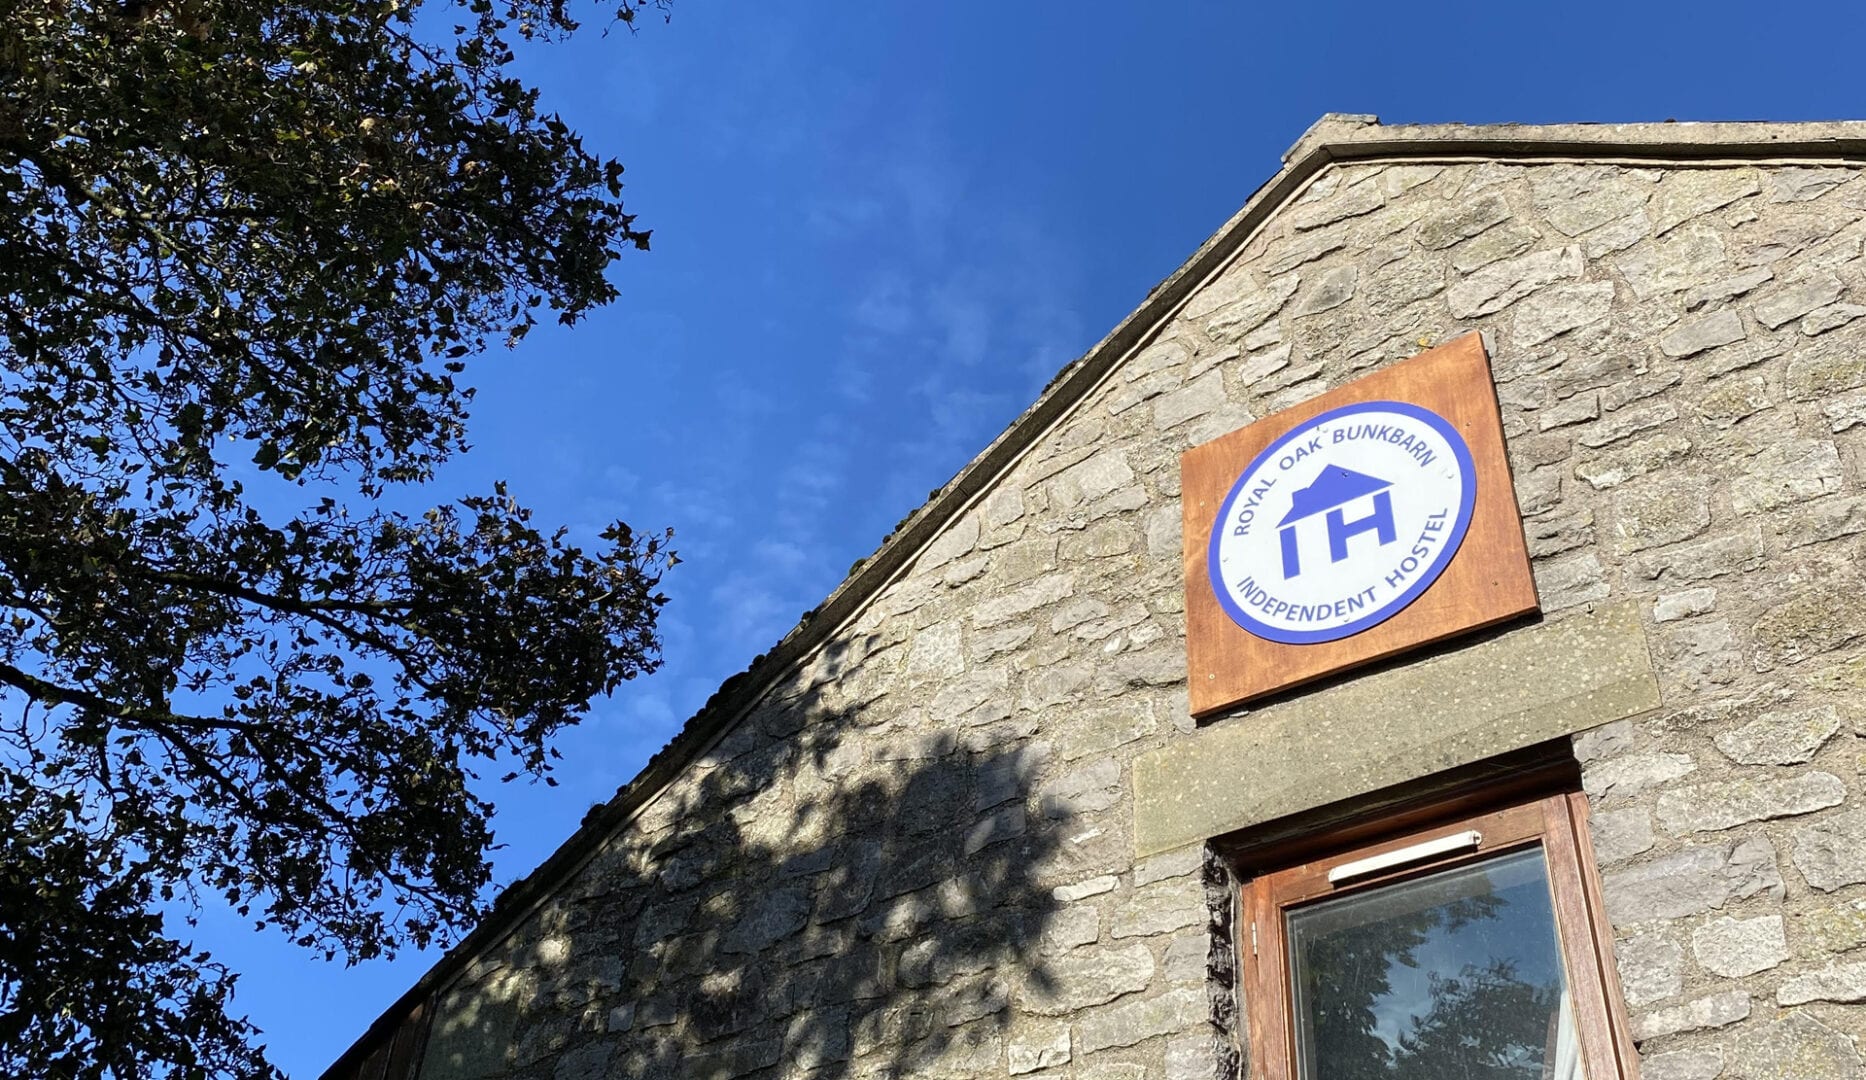 independent hostels sign on the Royal oak bunkhouse in the peak district